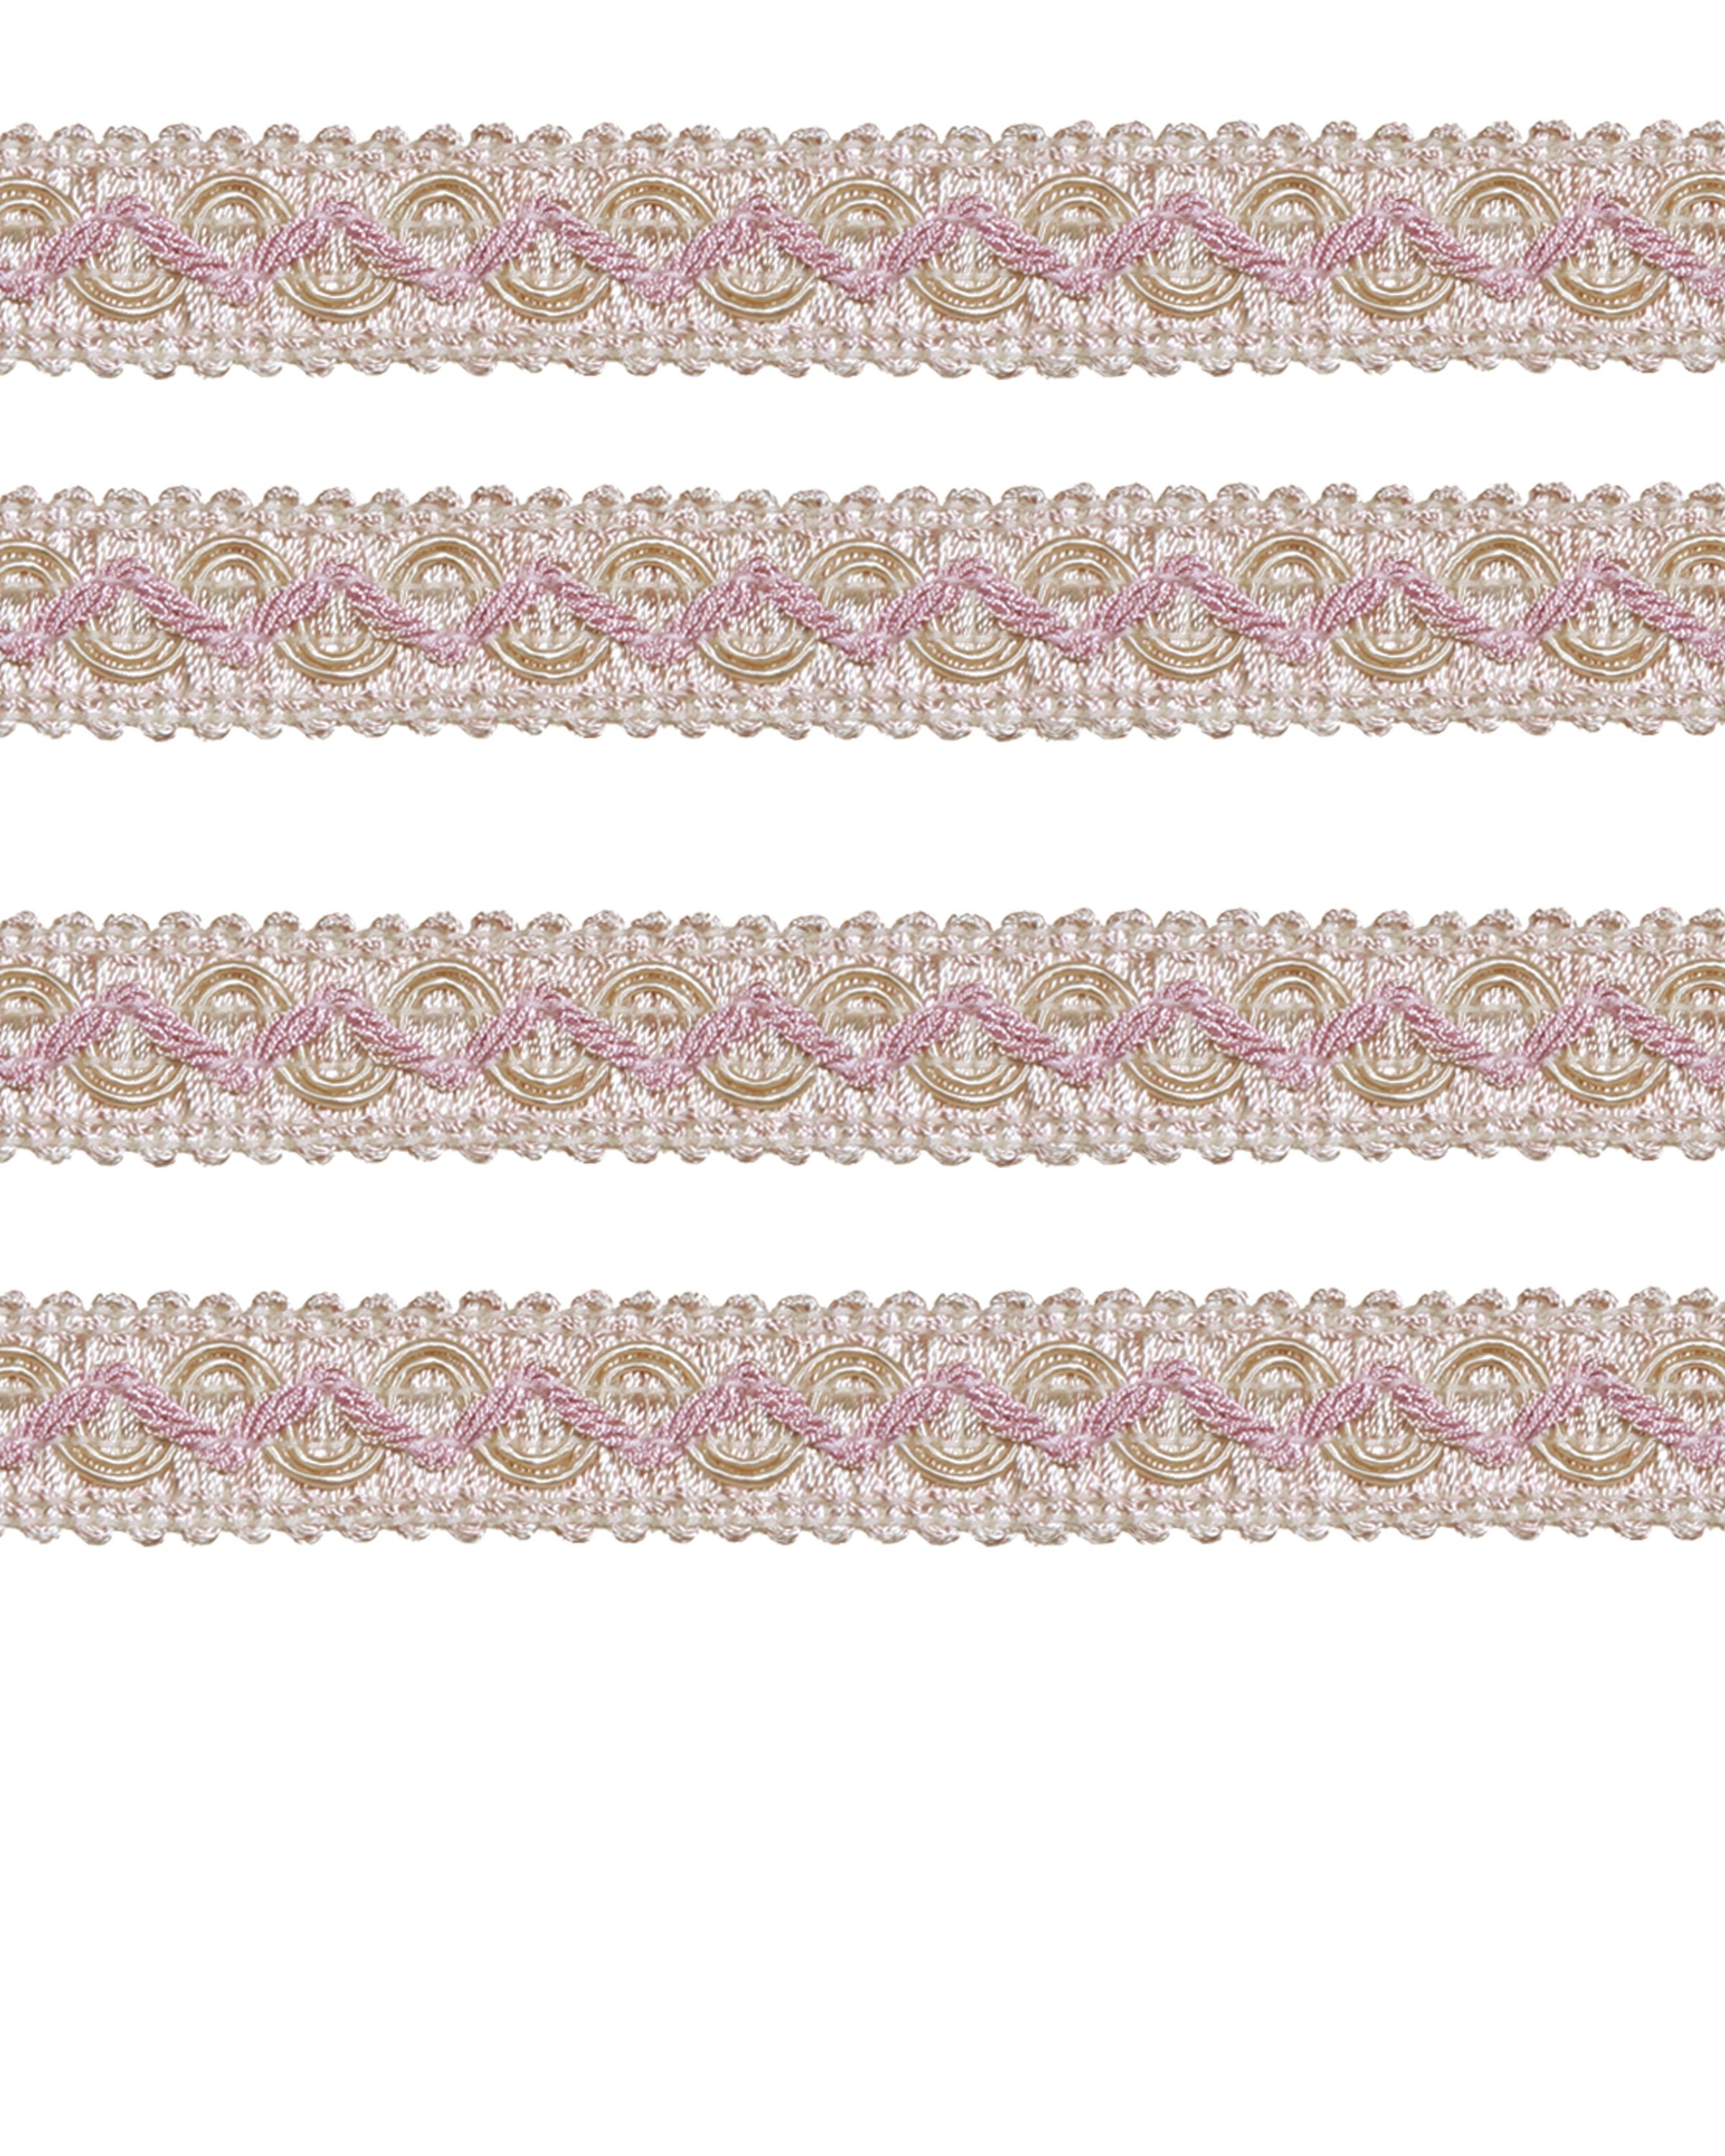 Ornate Braid - Pale Pink 20mm Price is for 5 metres